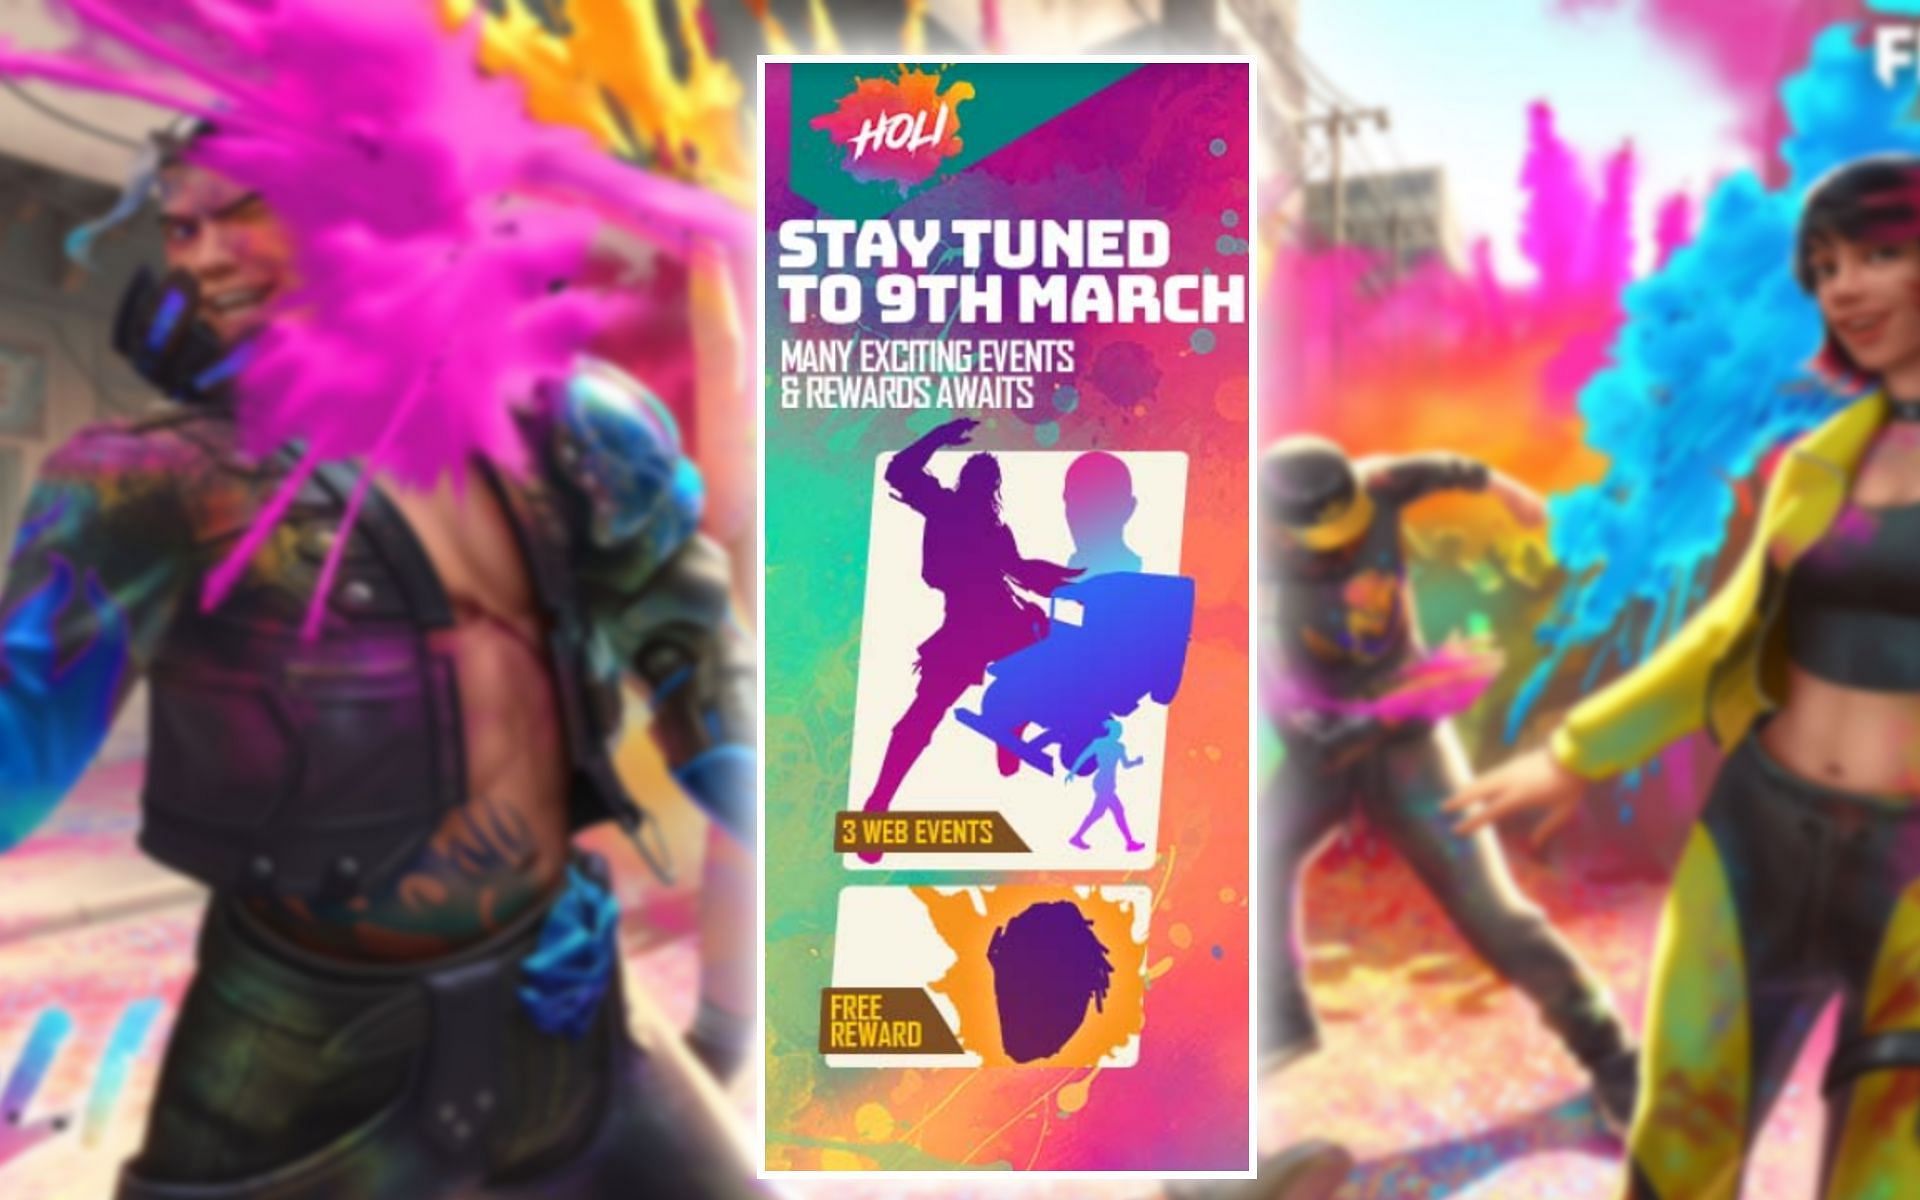 Holi-based events will be starting soon (Image via Garena)